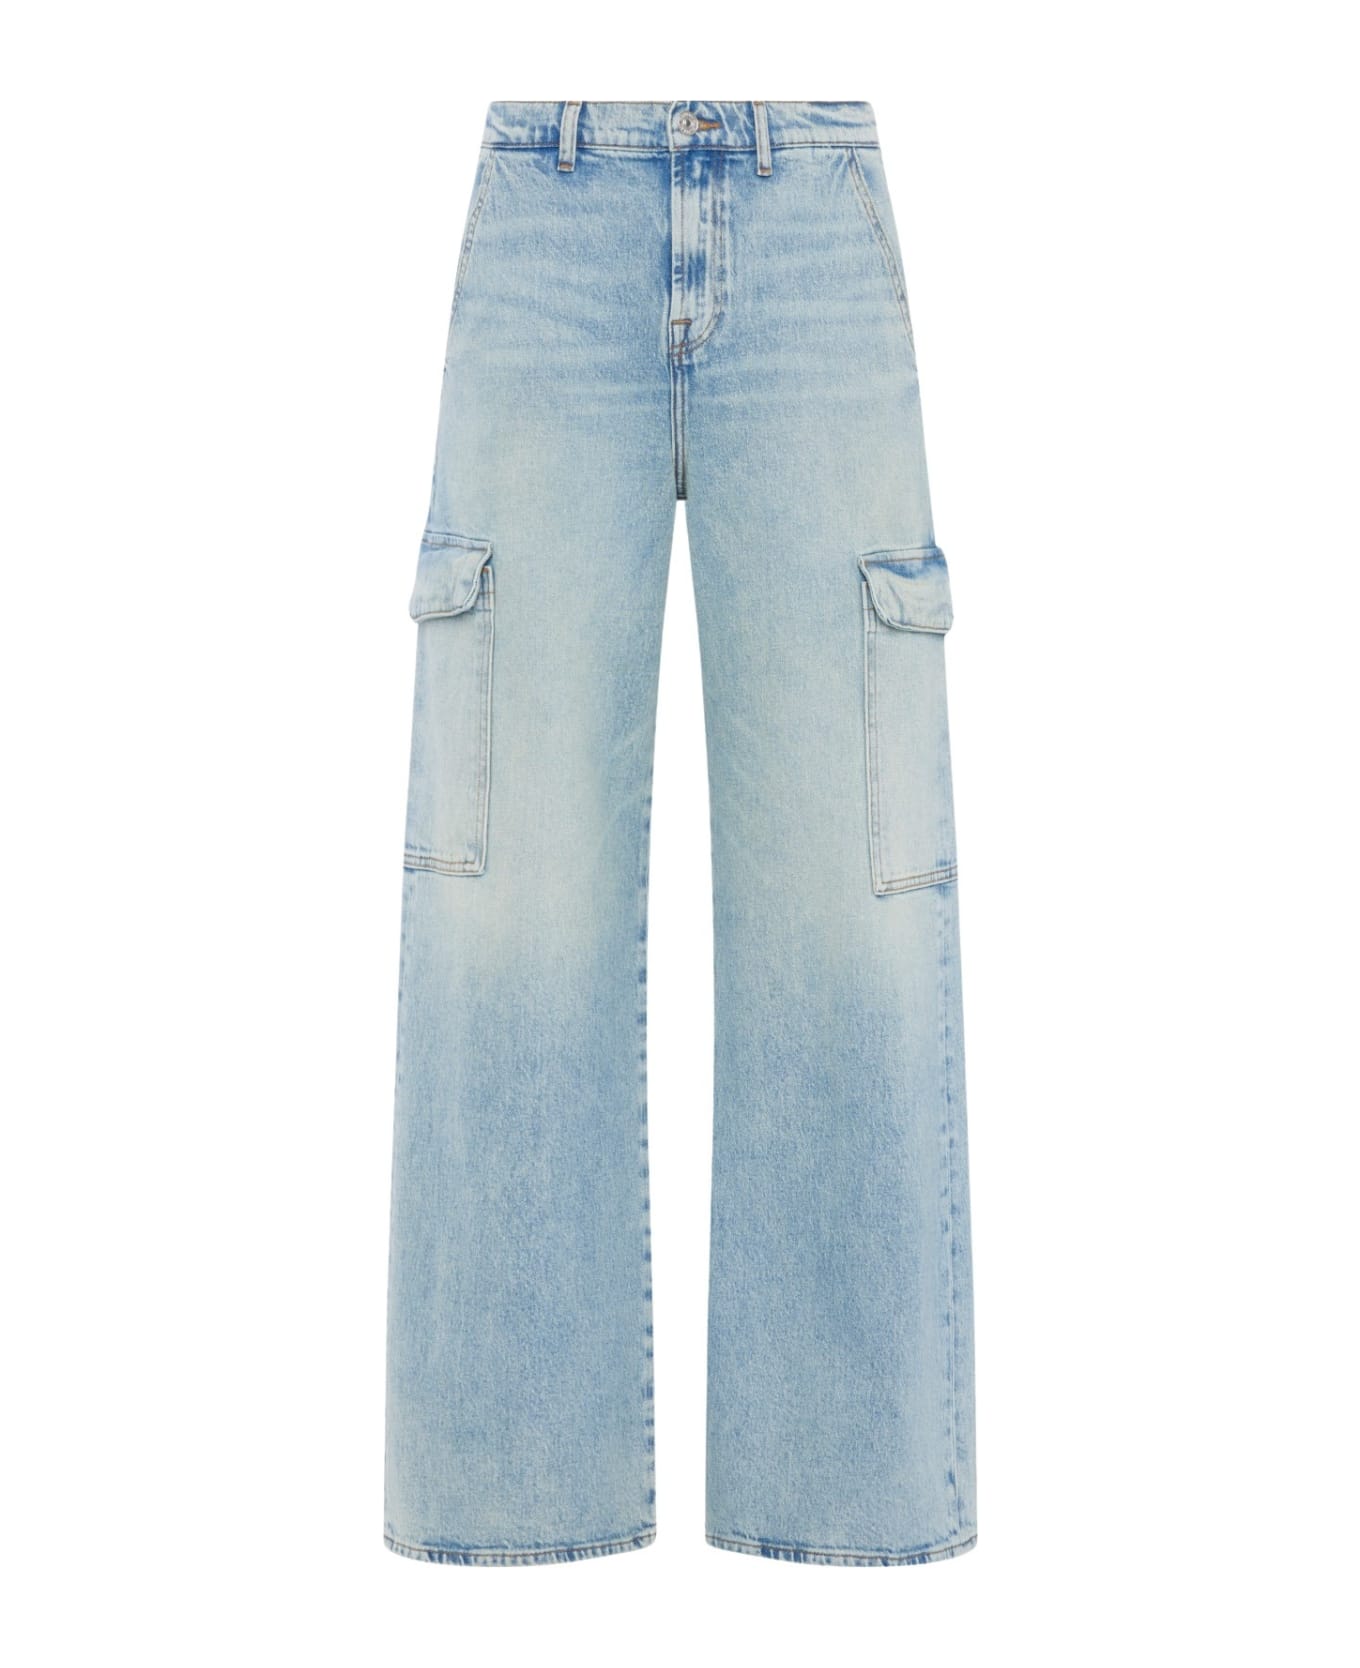 7 For All Mankind Cargo Scout Frost - Light Blue